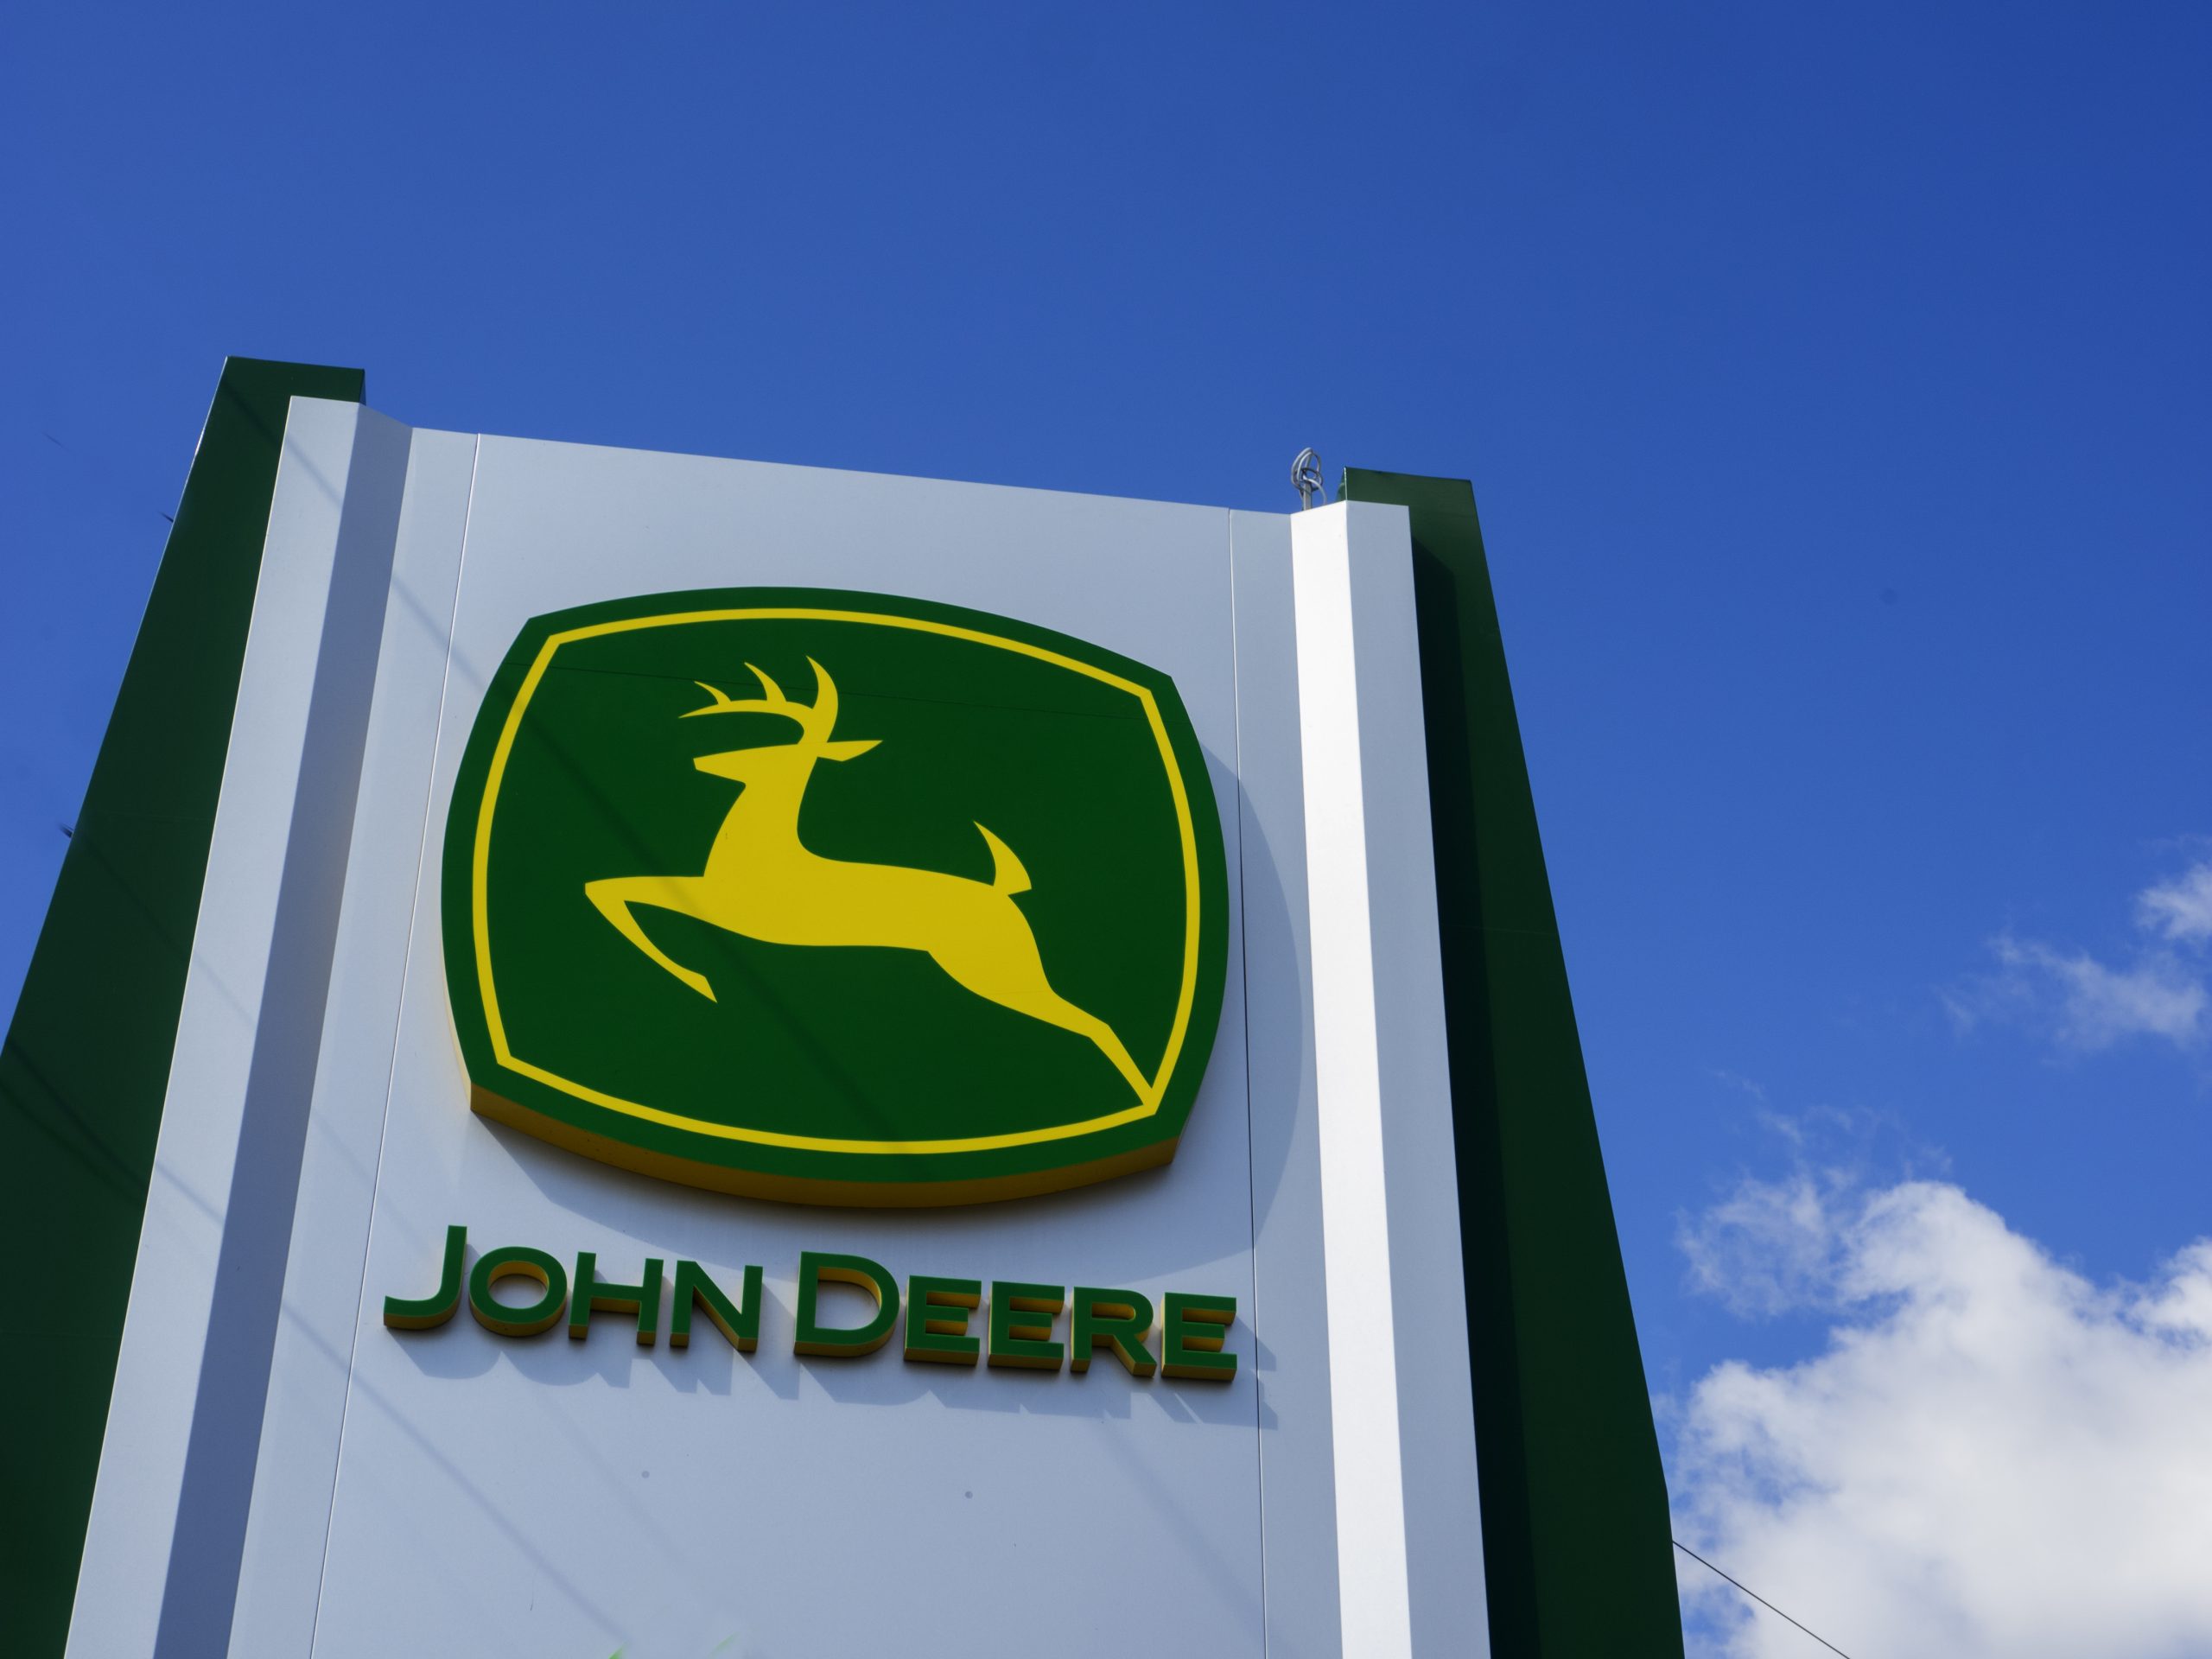 a John Deere logo on a tall sign with blue cloudy skies